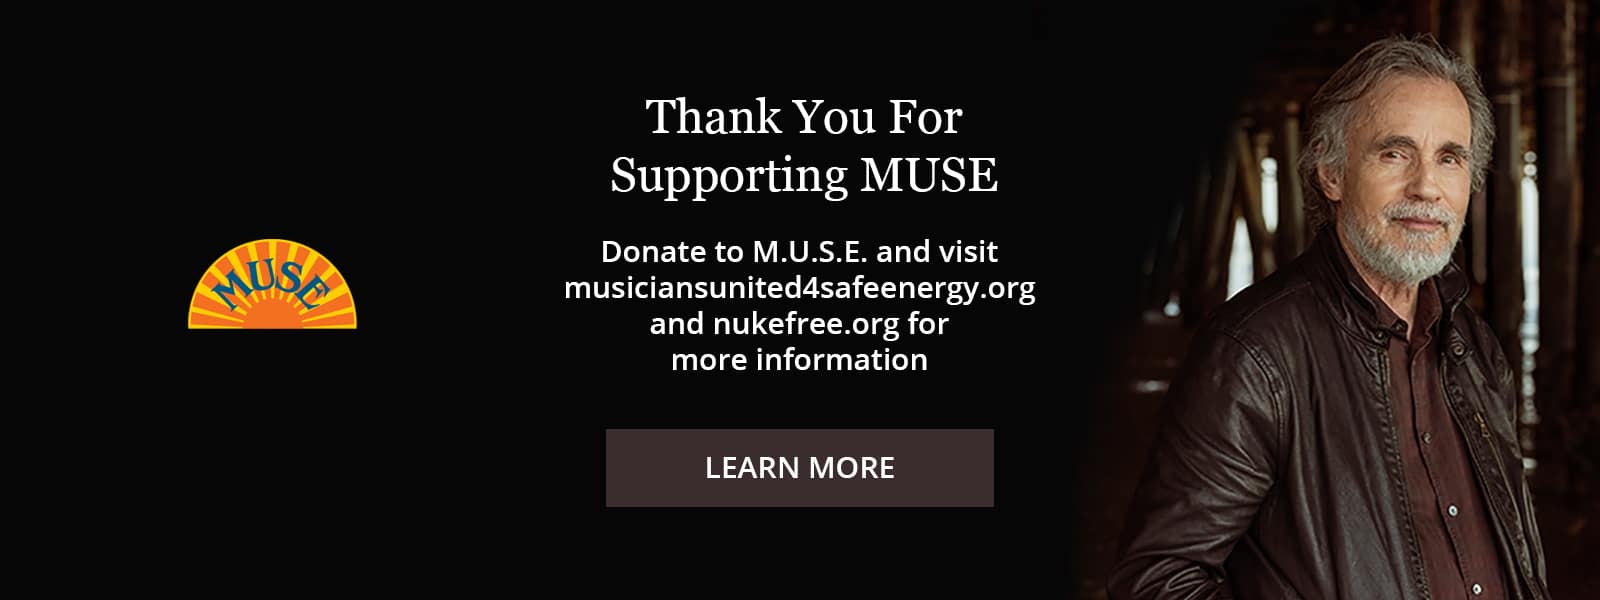 Thank you for supporting MUSE Learn More